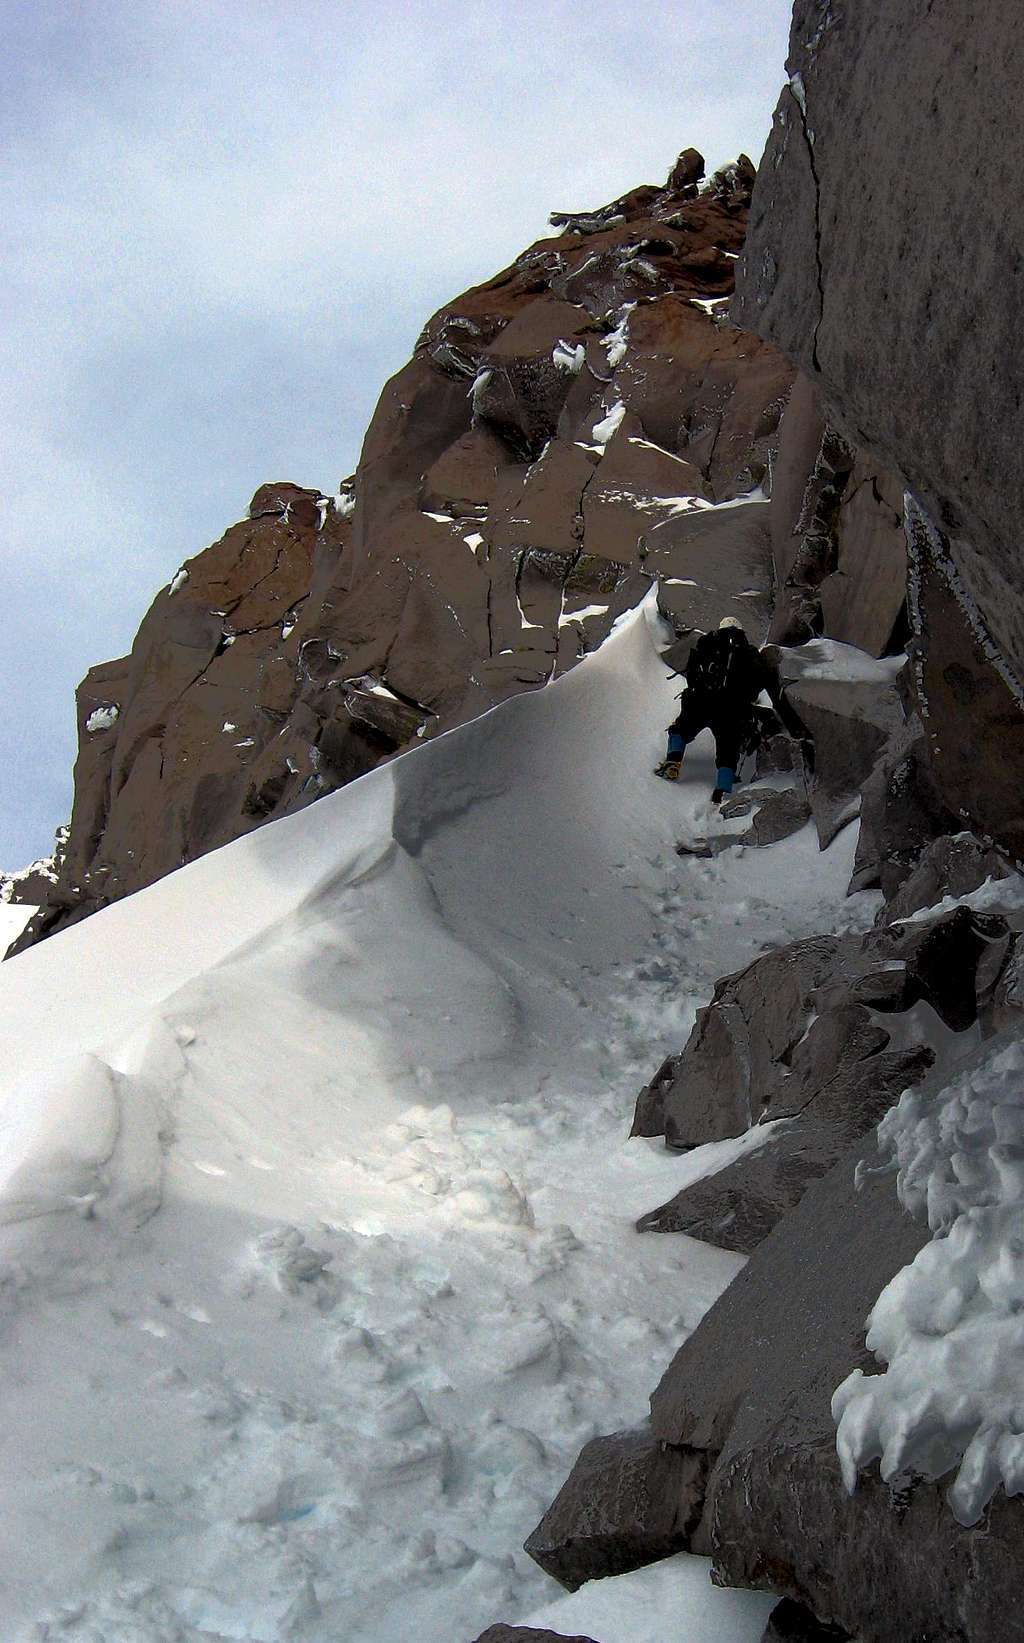 Tom Looking for an Exit from the Traverse